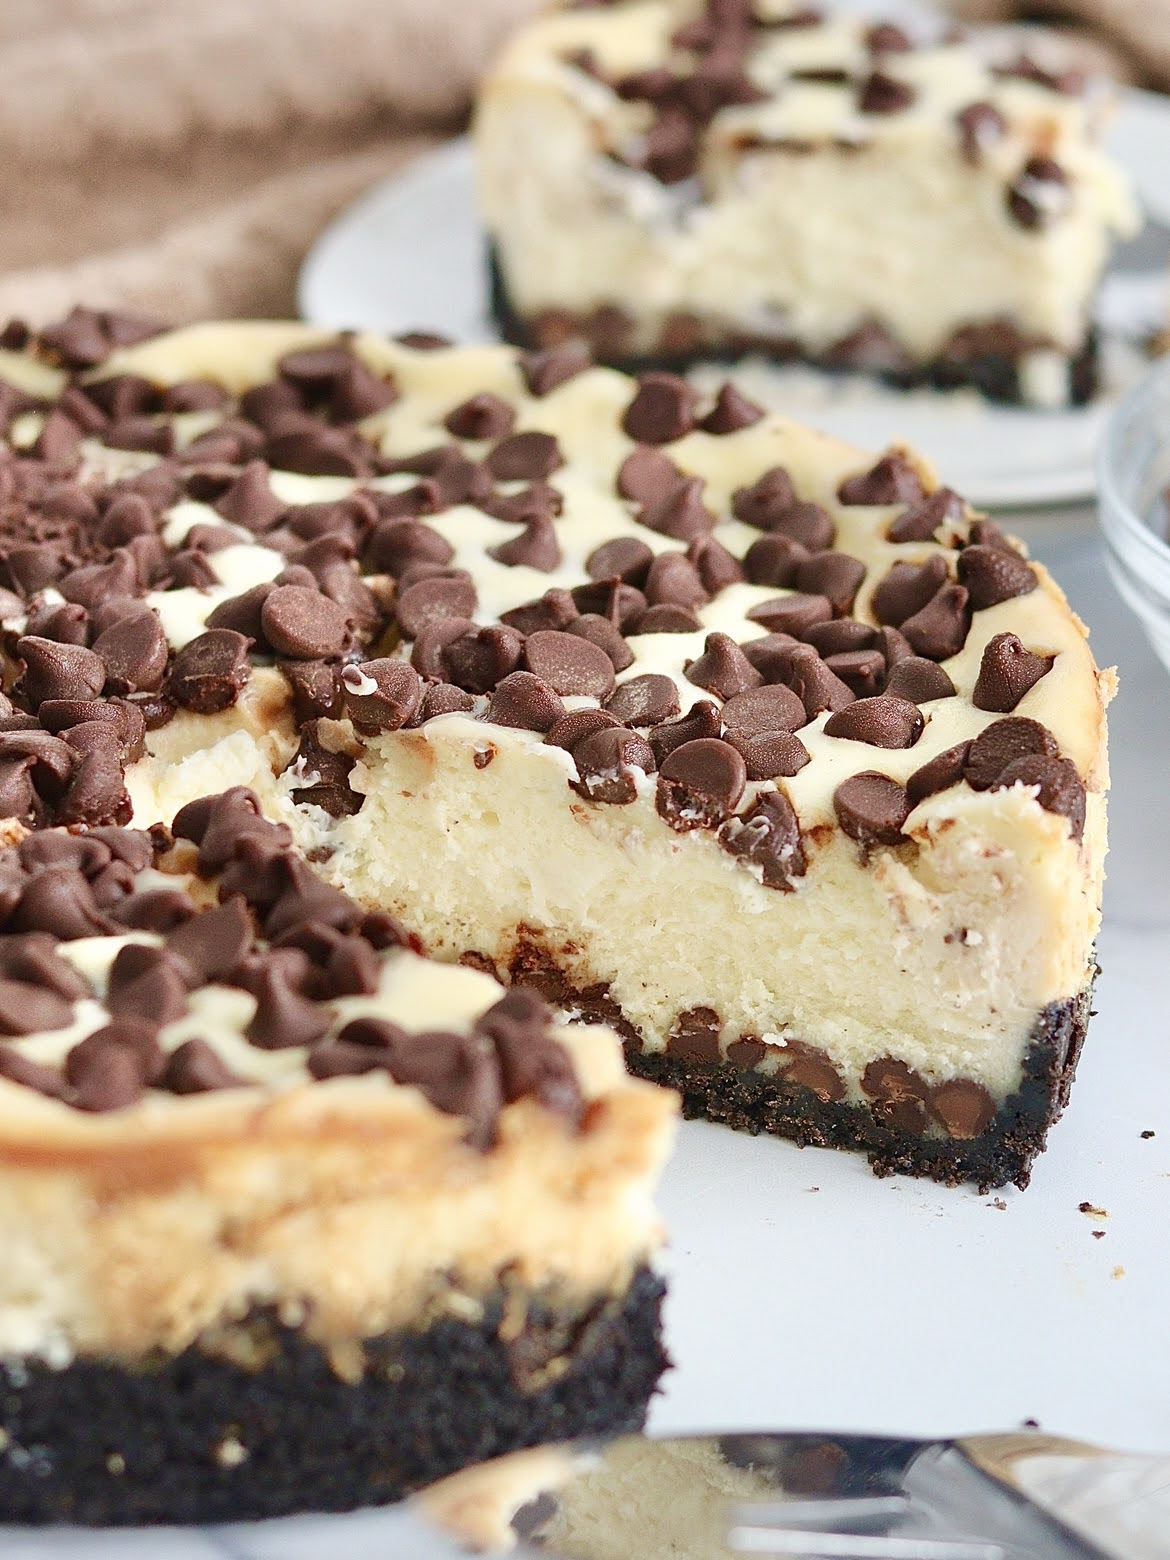 Chocolate Chip Cheesecake with a slice taken out of it.